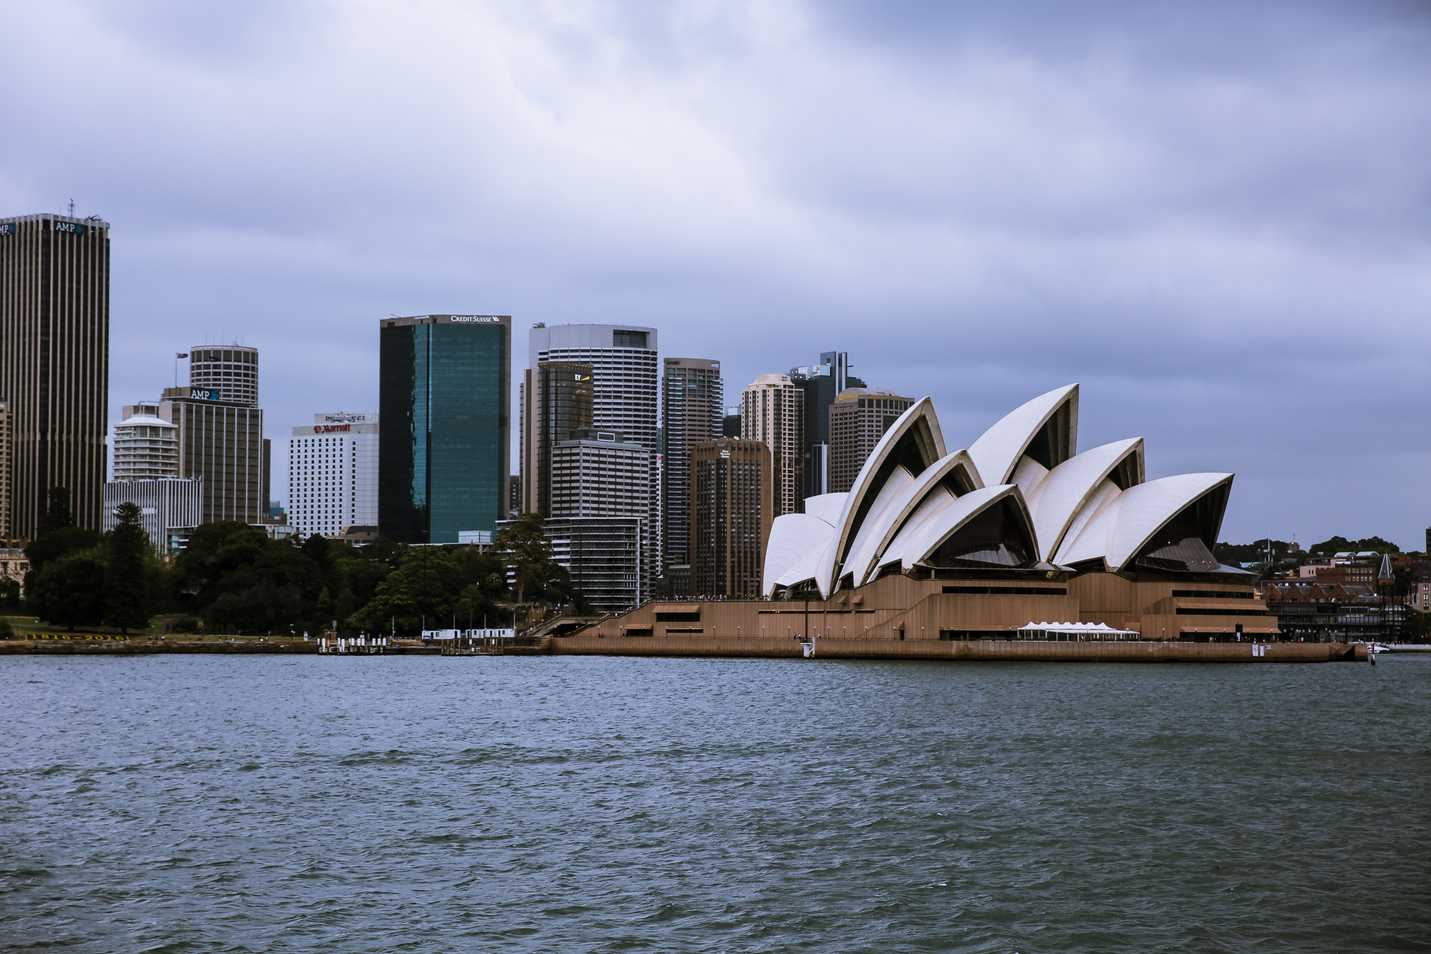 Famous Syndey Opera House in Australia